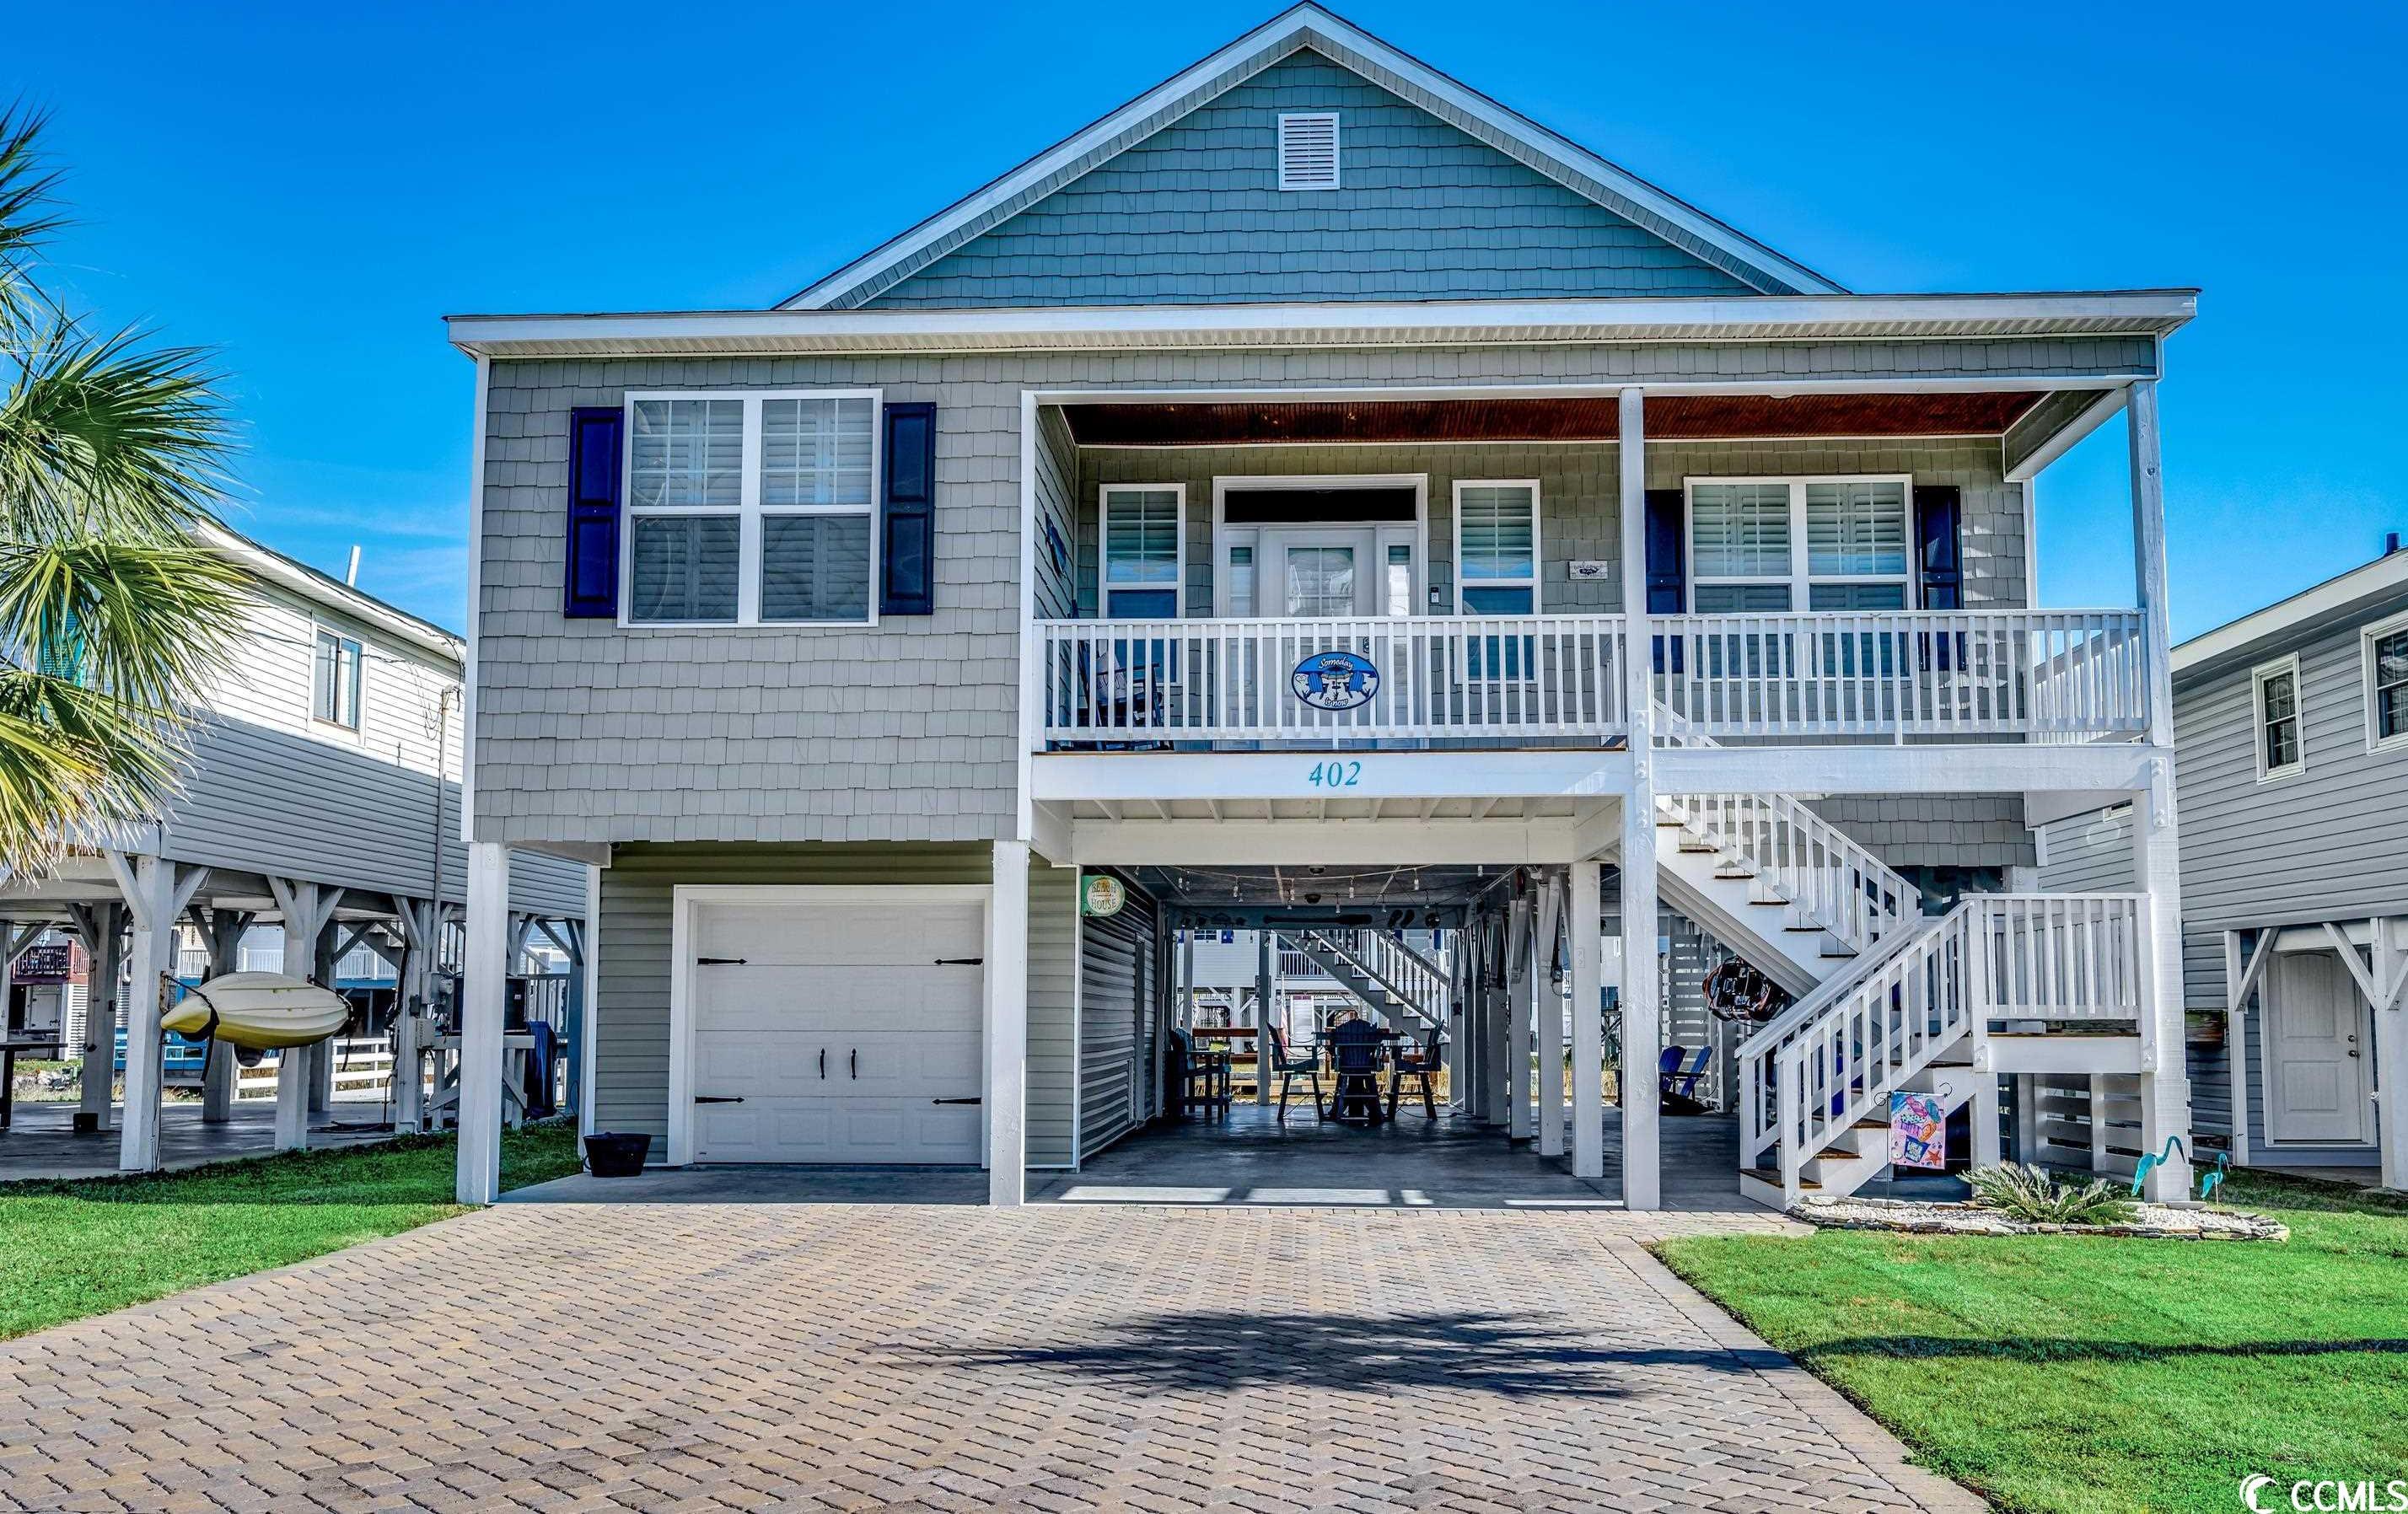 Photo one of 402 33Rd Ave. N North Myrtle Beach SC 29582 | MLS 2402489